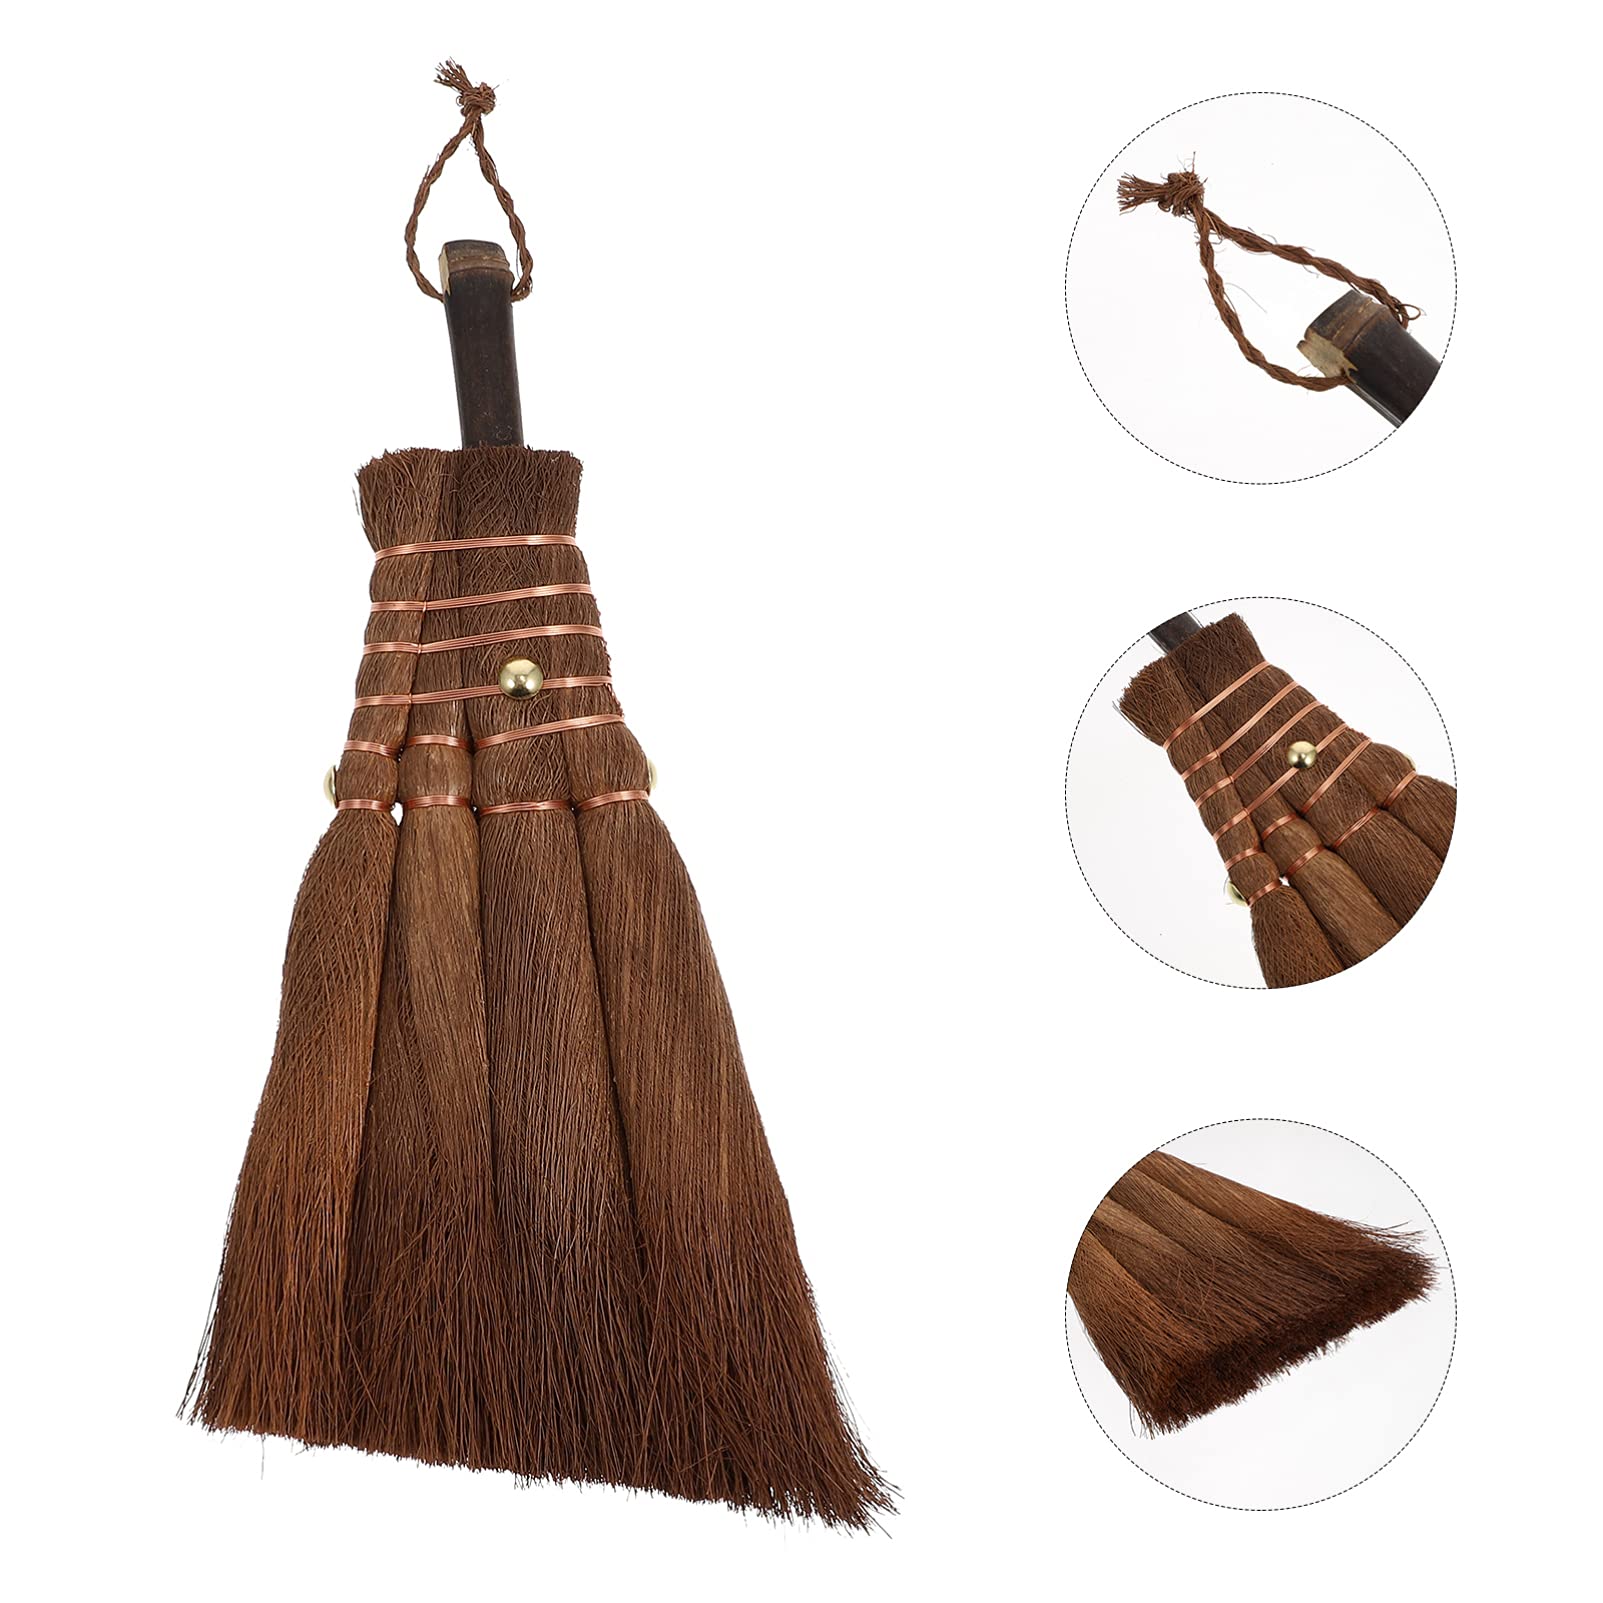 Hemoton Hand Broom Soft Natural Palm Bristles Small Whisk Broom Desk Cleaning Brush for Indoor Outdoor (Light Brown)